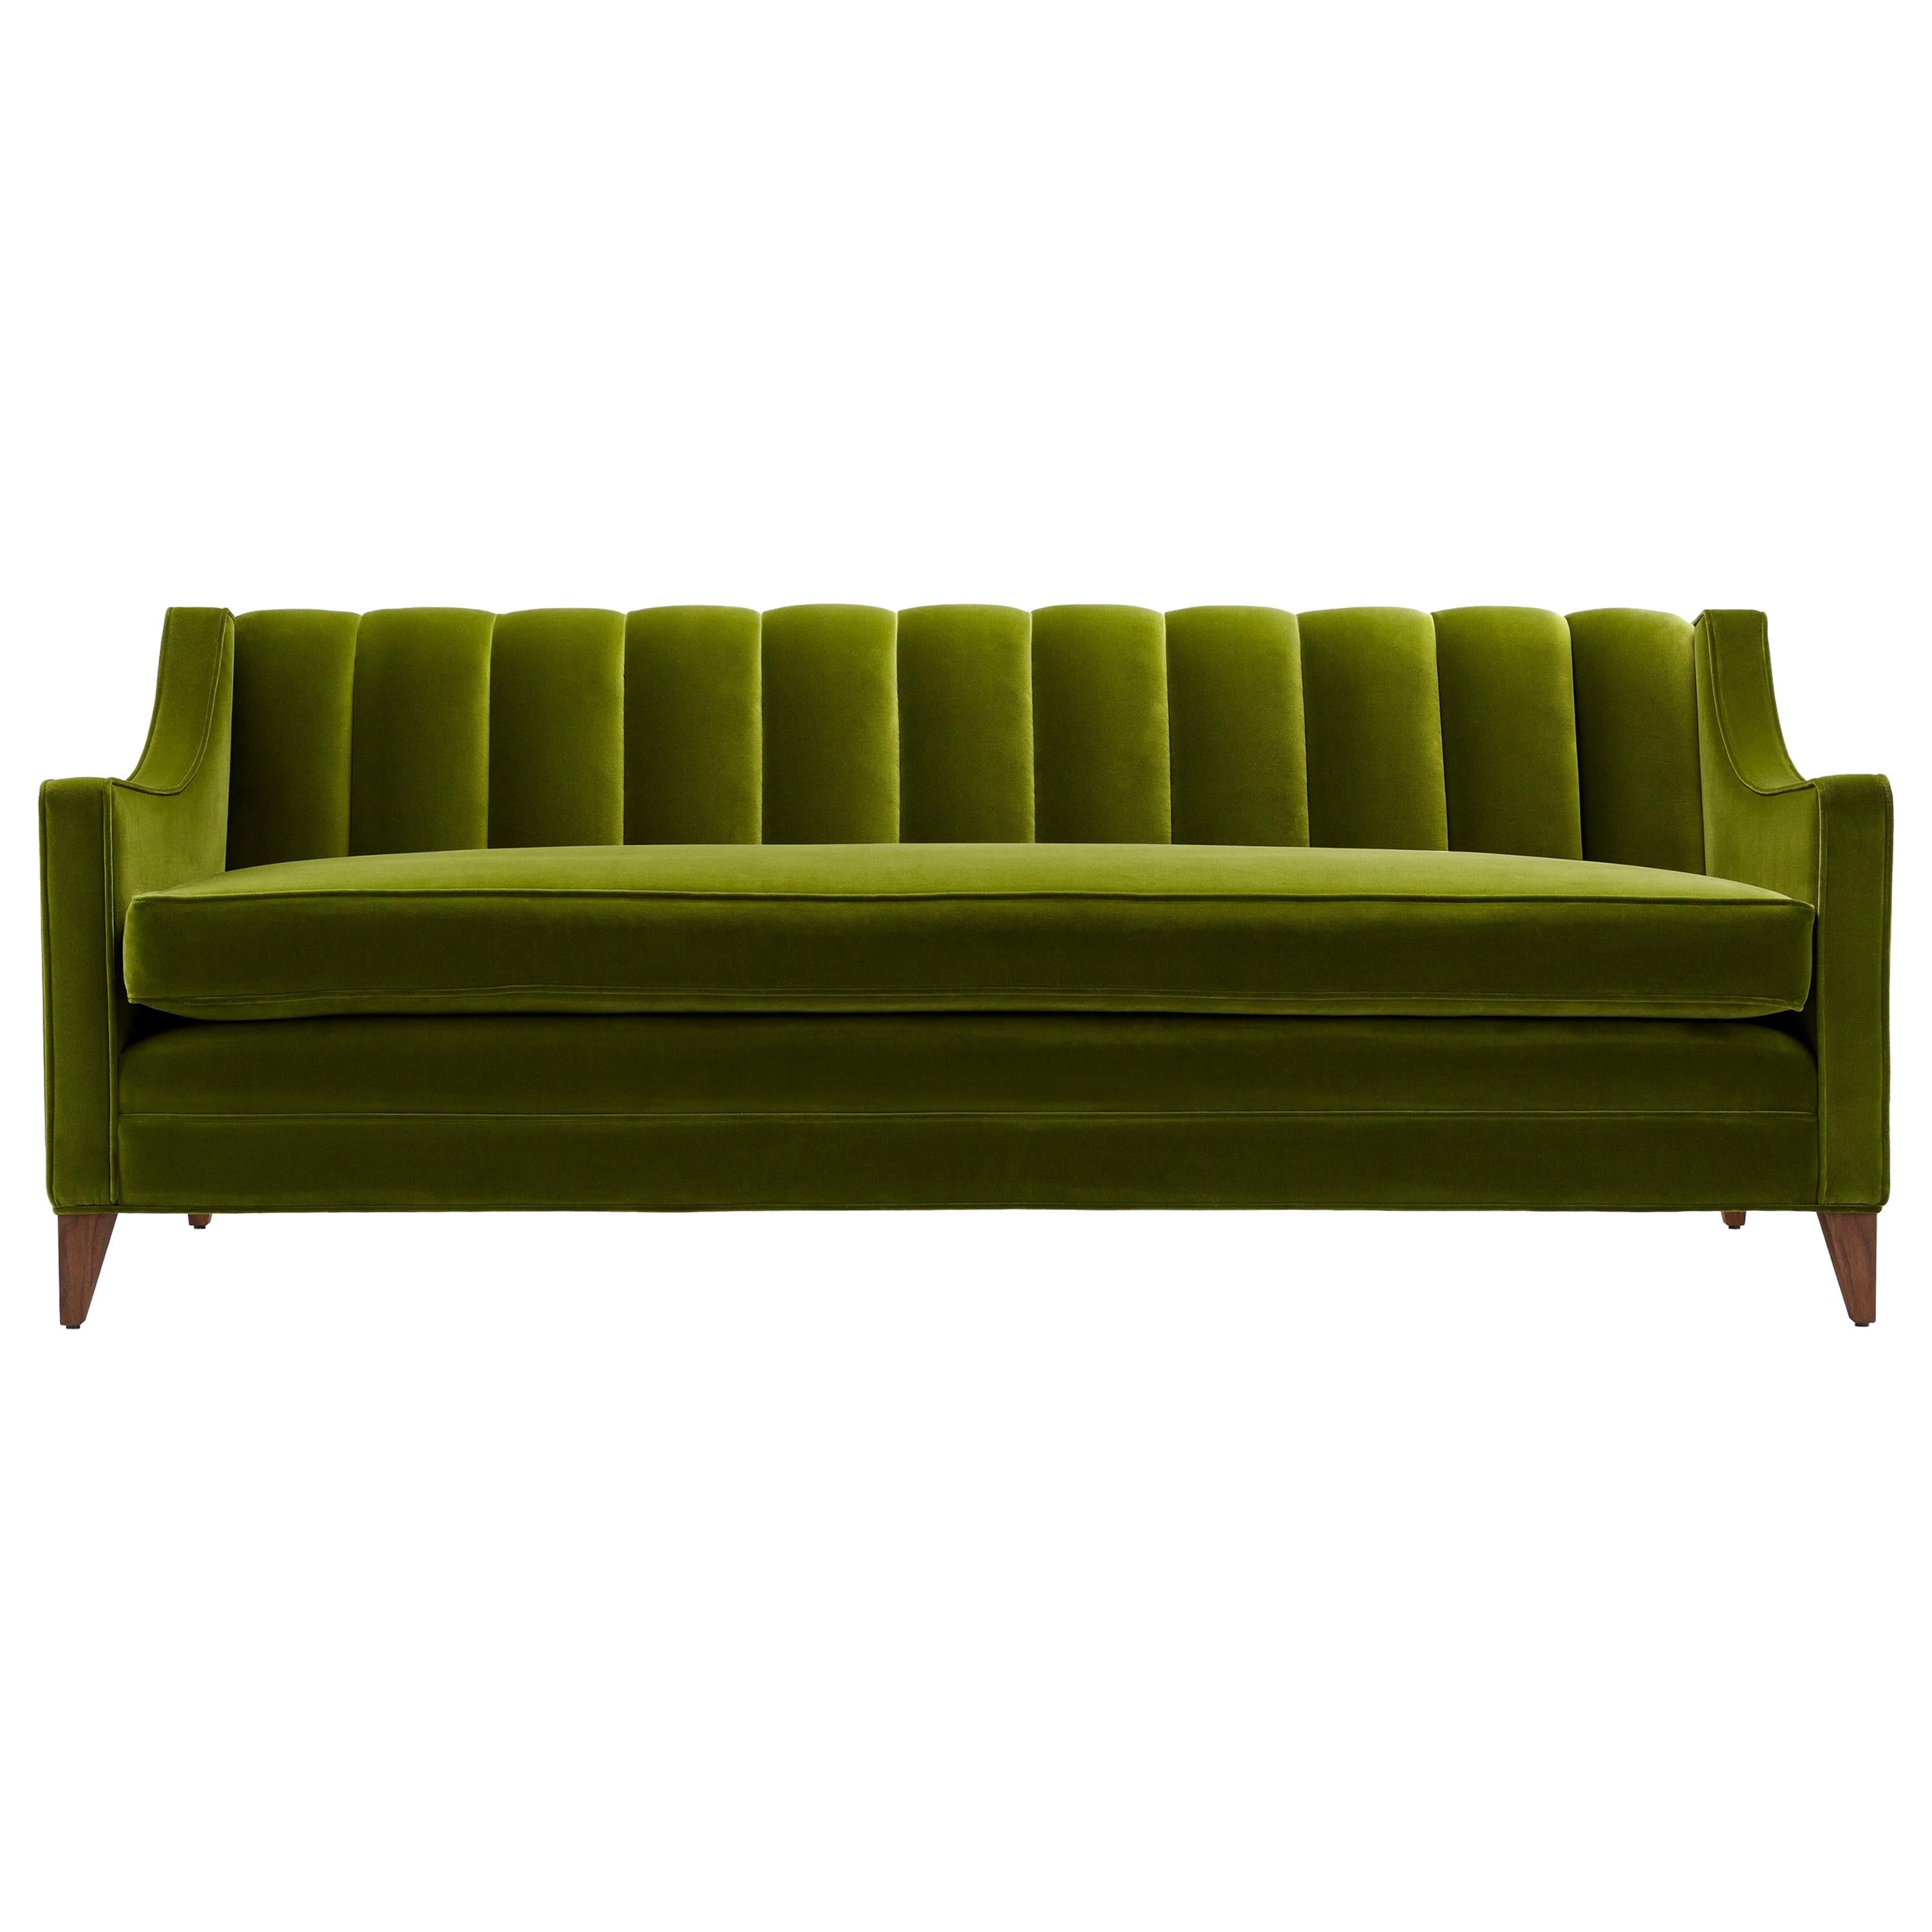 Contemporary Channeled Fleure Luxus Sofa in Velvet and Oak or Walnut Legs For Sale